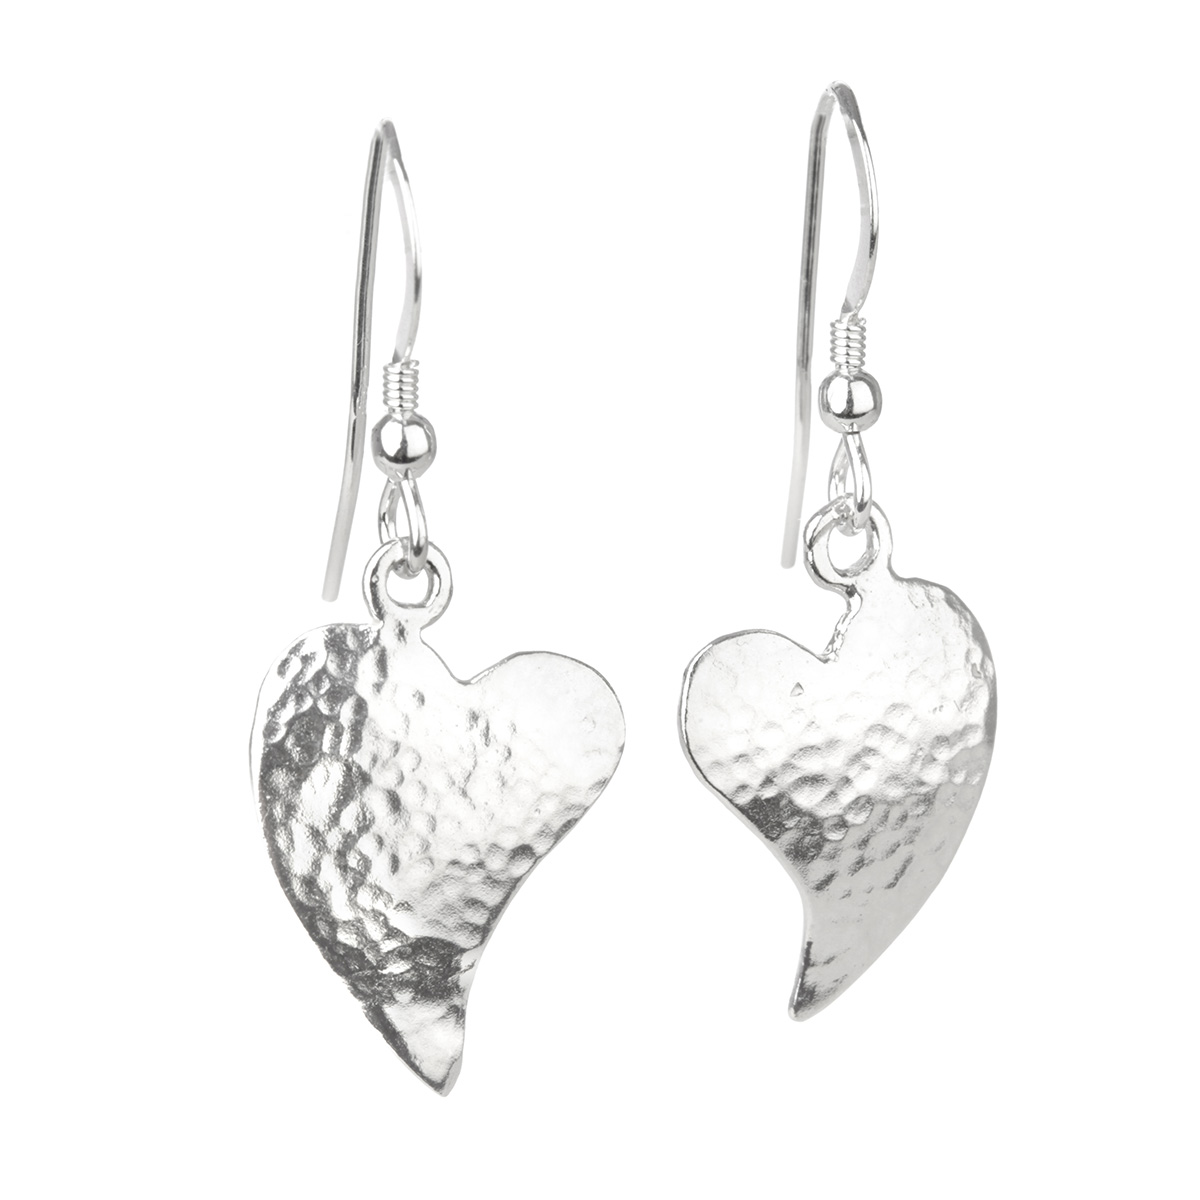 Ancient Hearts - Edle Herz Ohrhänger aus Sterling Silber - Made in England